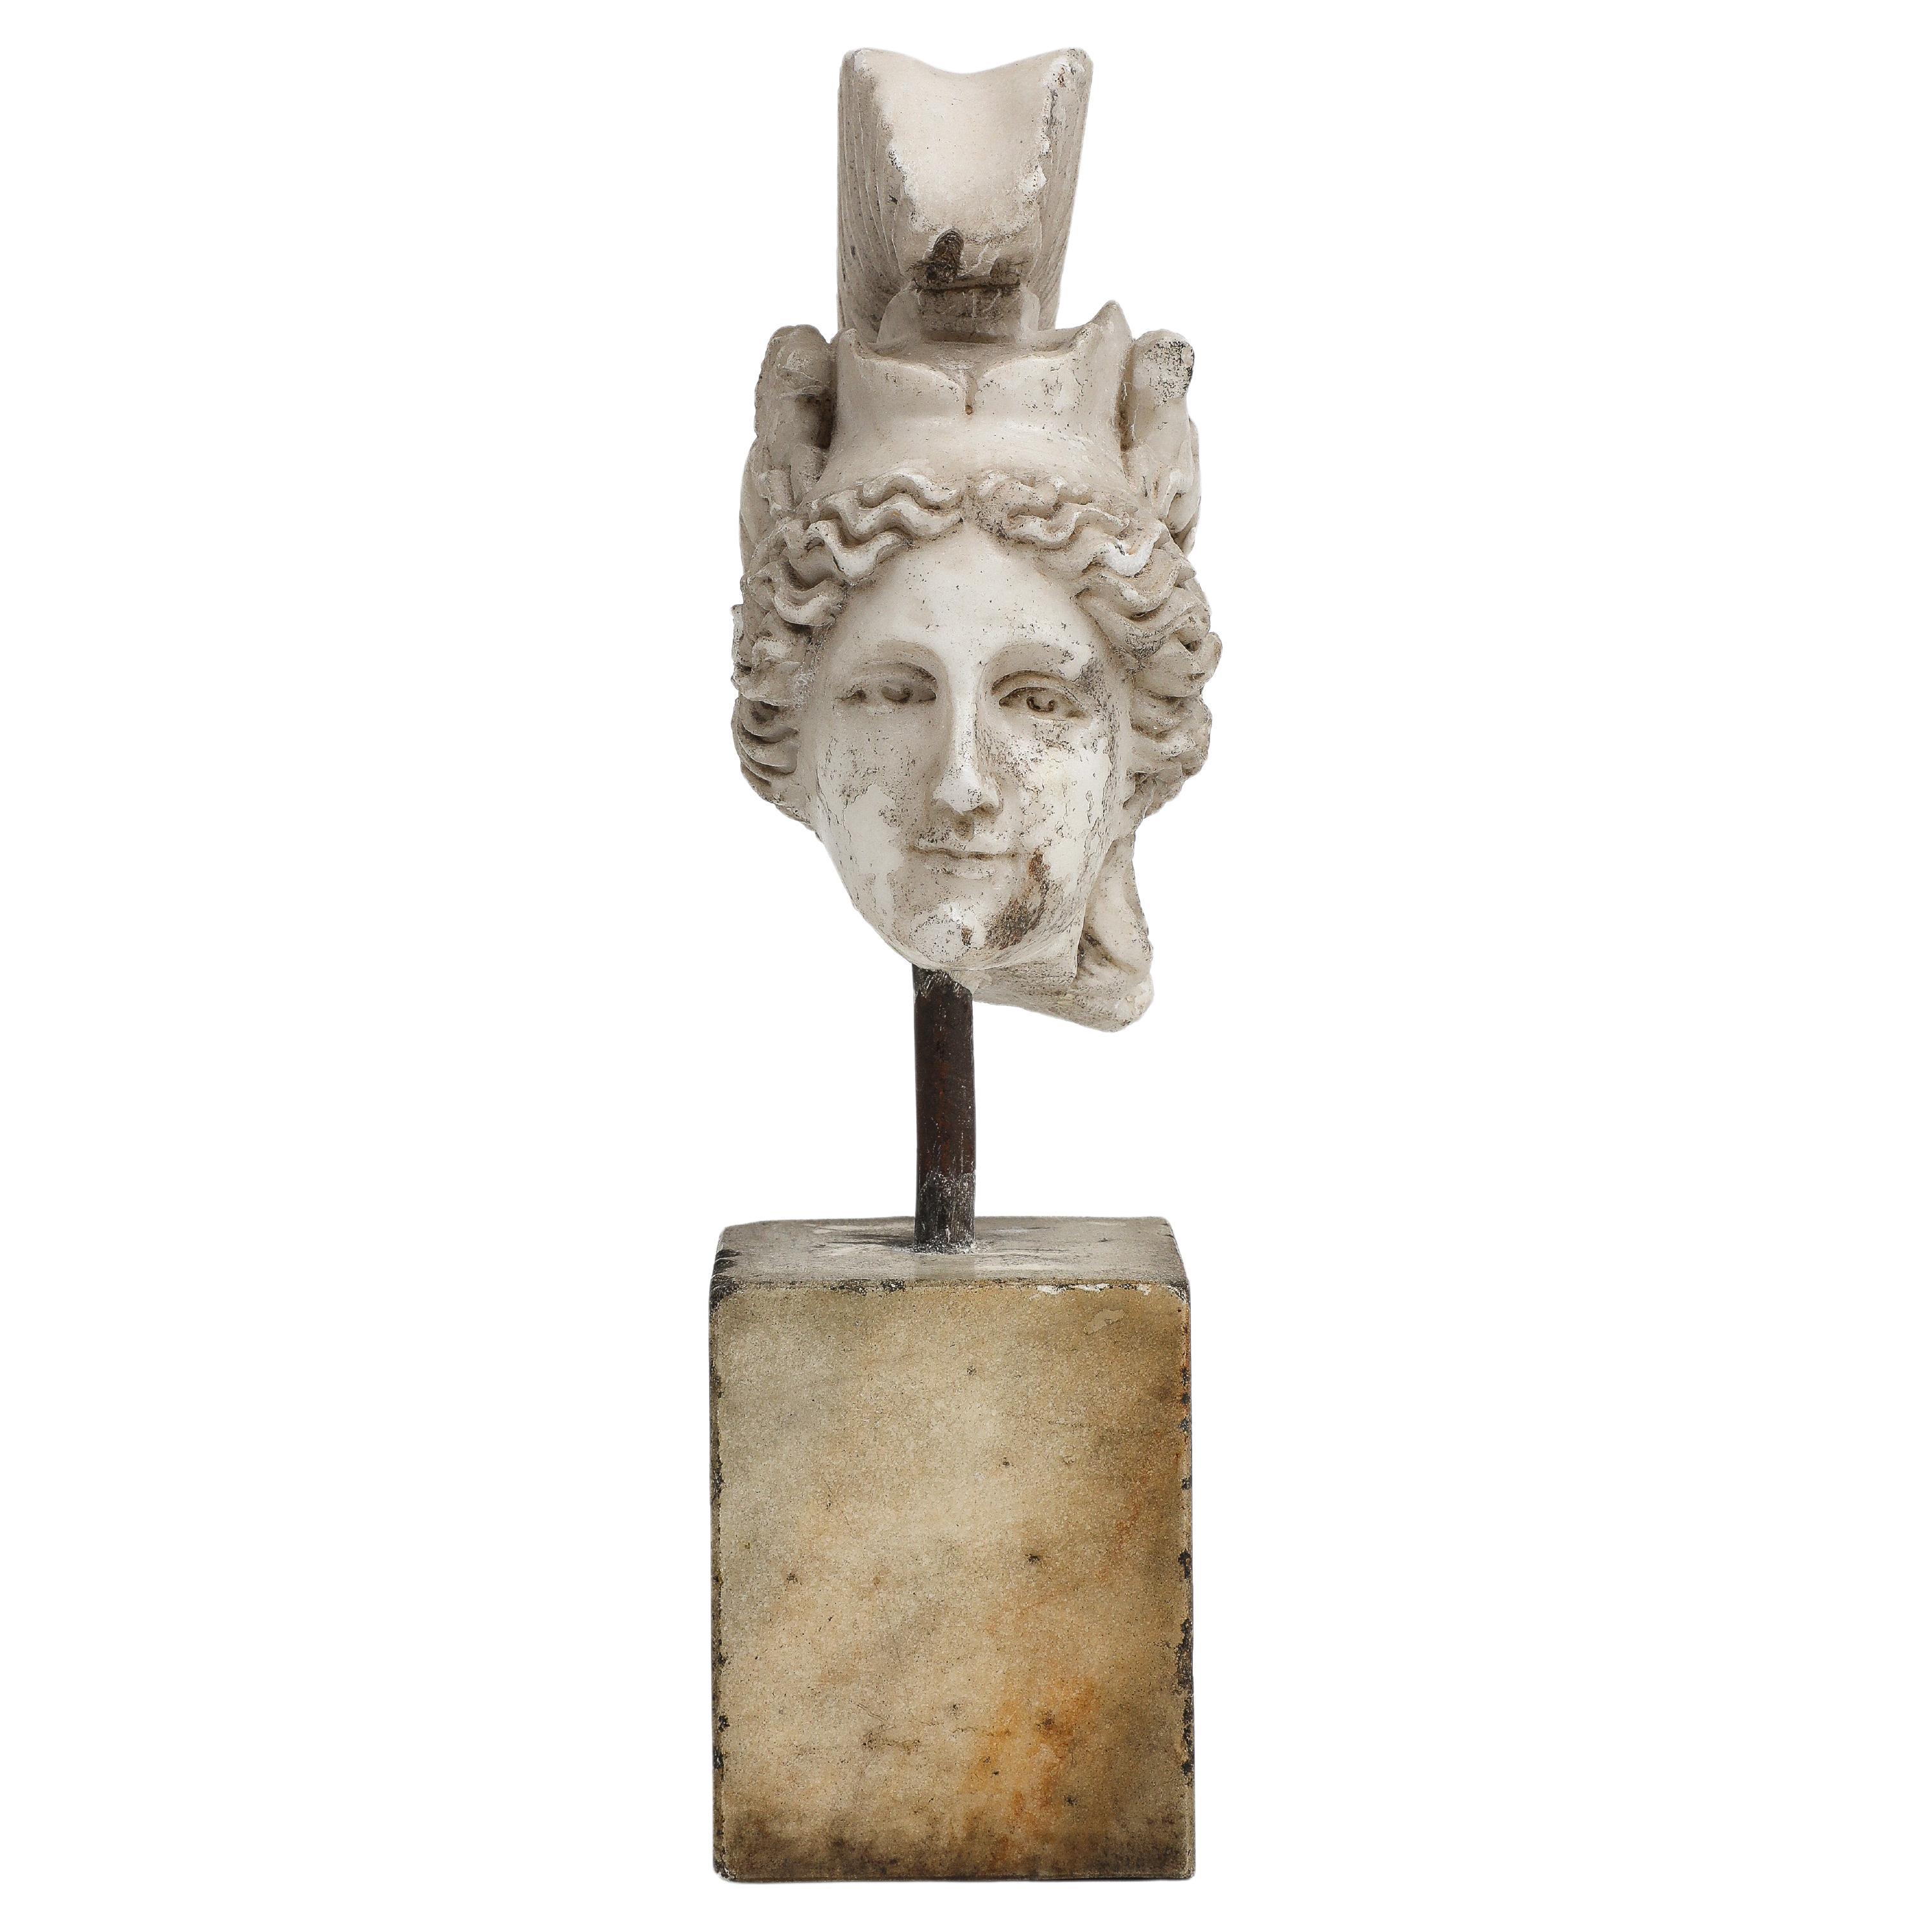 Petite sculpture of the head of Minerva carved in white marble, on a parallelepiped base, 19th Century Greek. 

Minerva is the Roman goddess of poetry, medicine, commerce, weaving, the crafts, and wisdom. She is depicted here with a helmet adorned